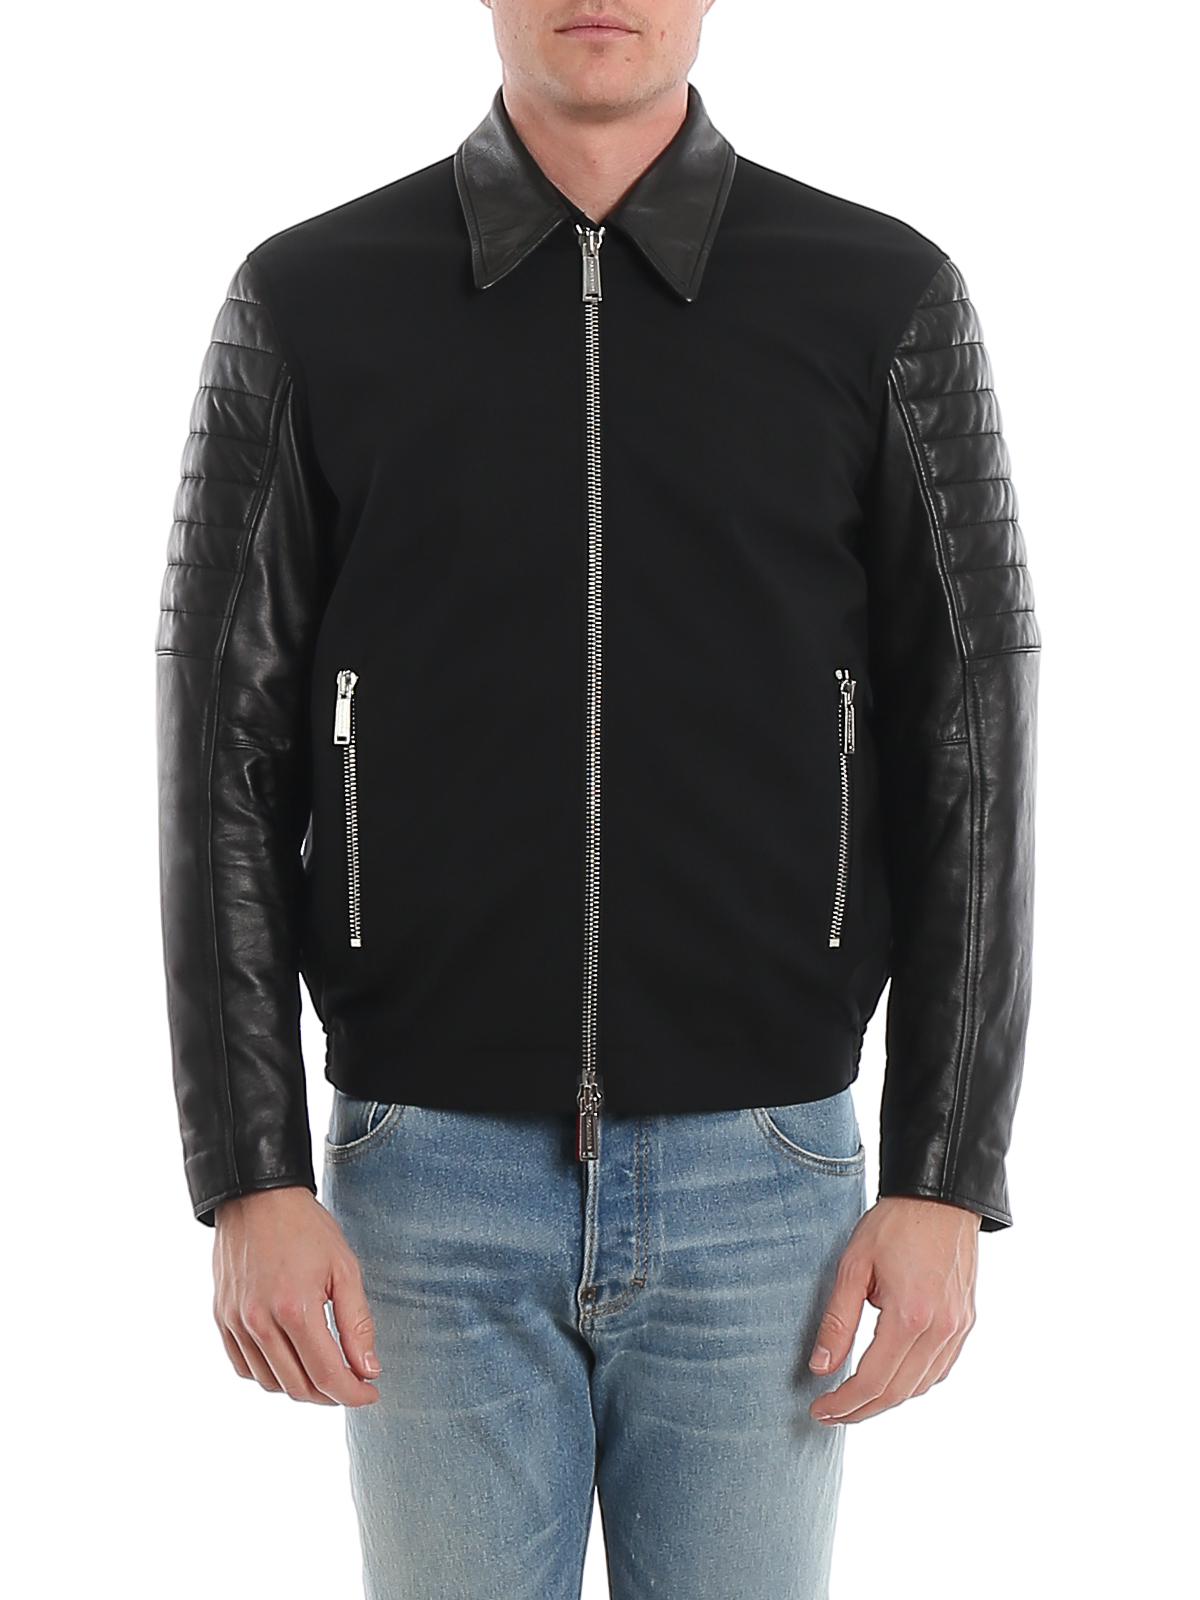 dsquared2 jacket leather sleeves